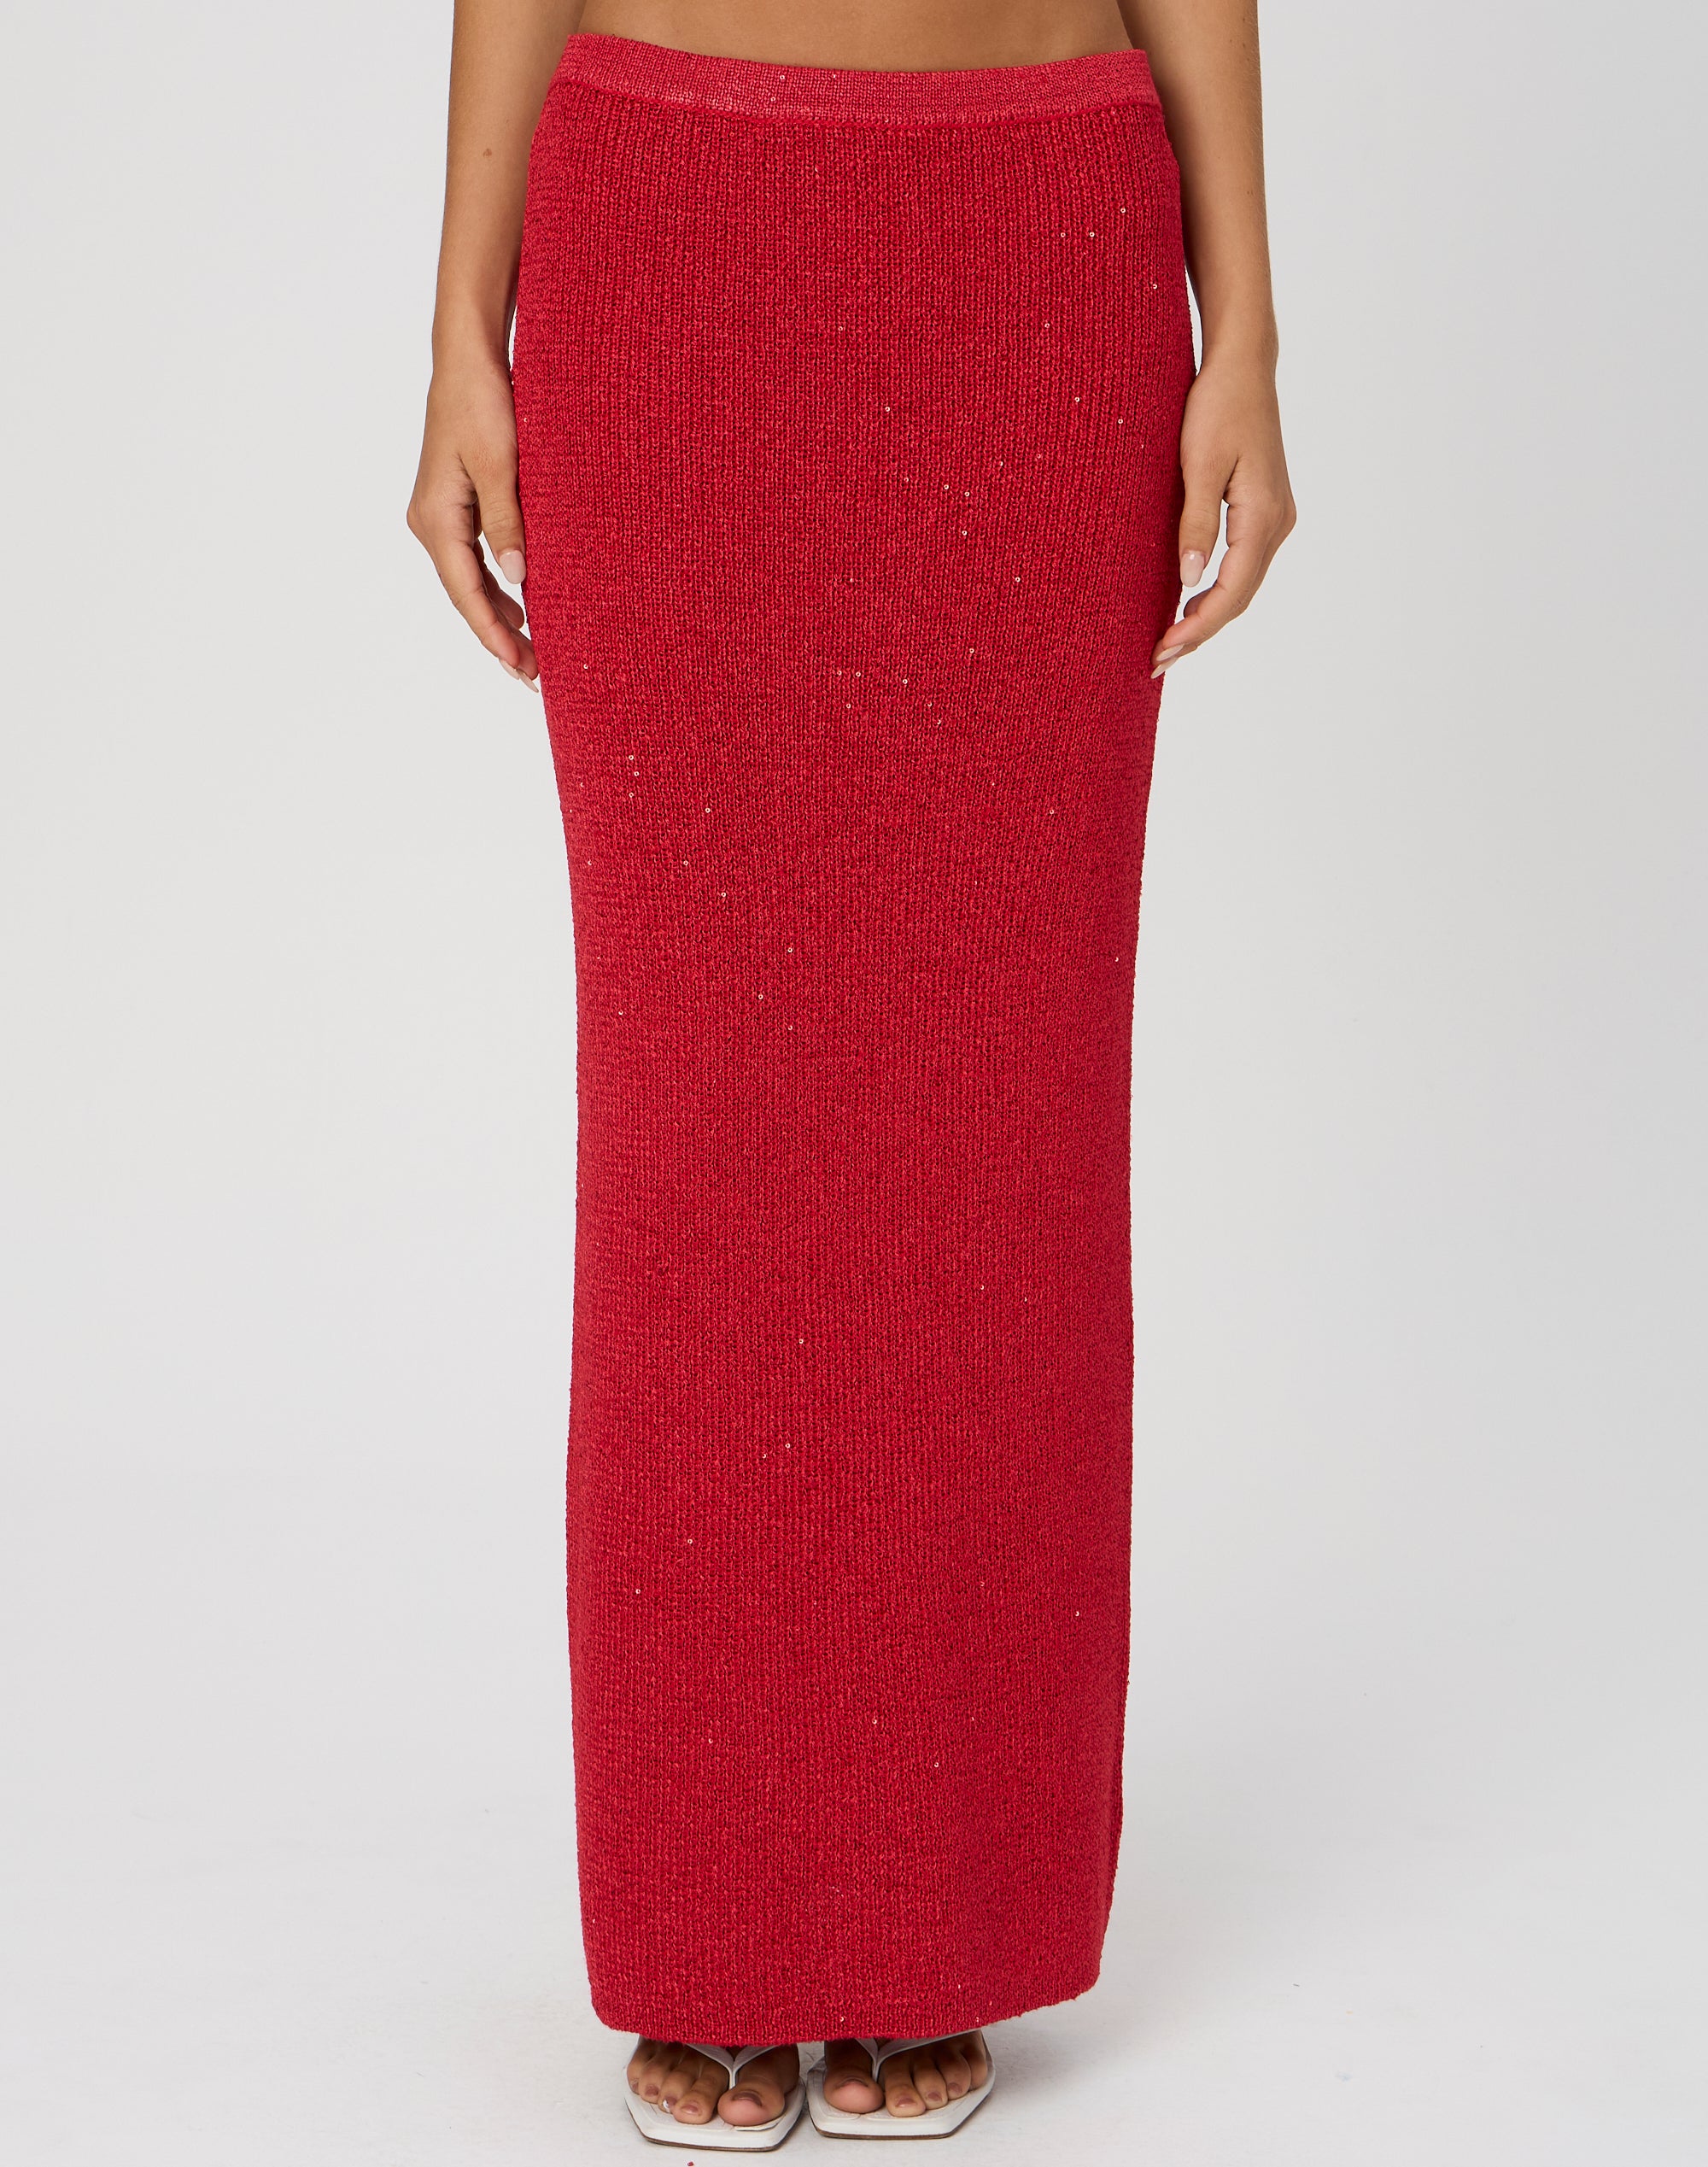 https://www.glassons.com/content/products/fabulosa-knit-maxi-skirt-mulan-red-full-sl166779met.jpg